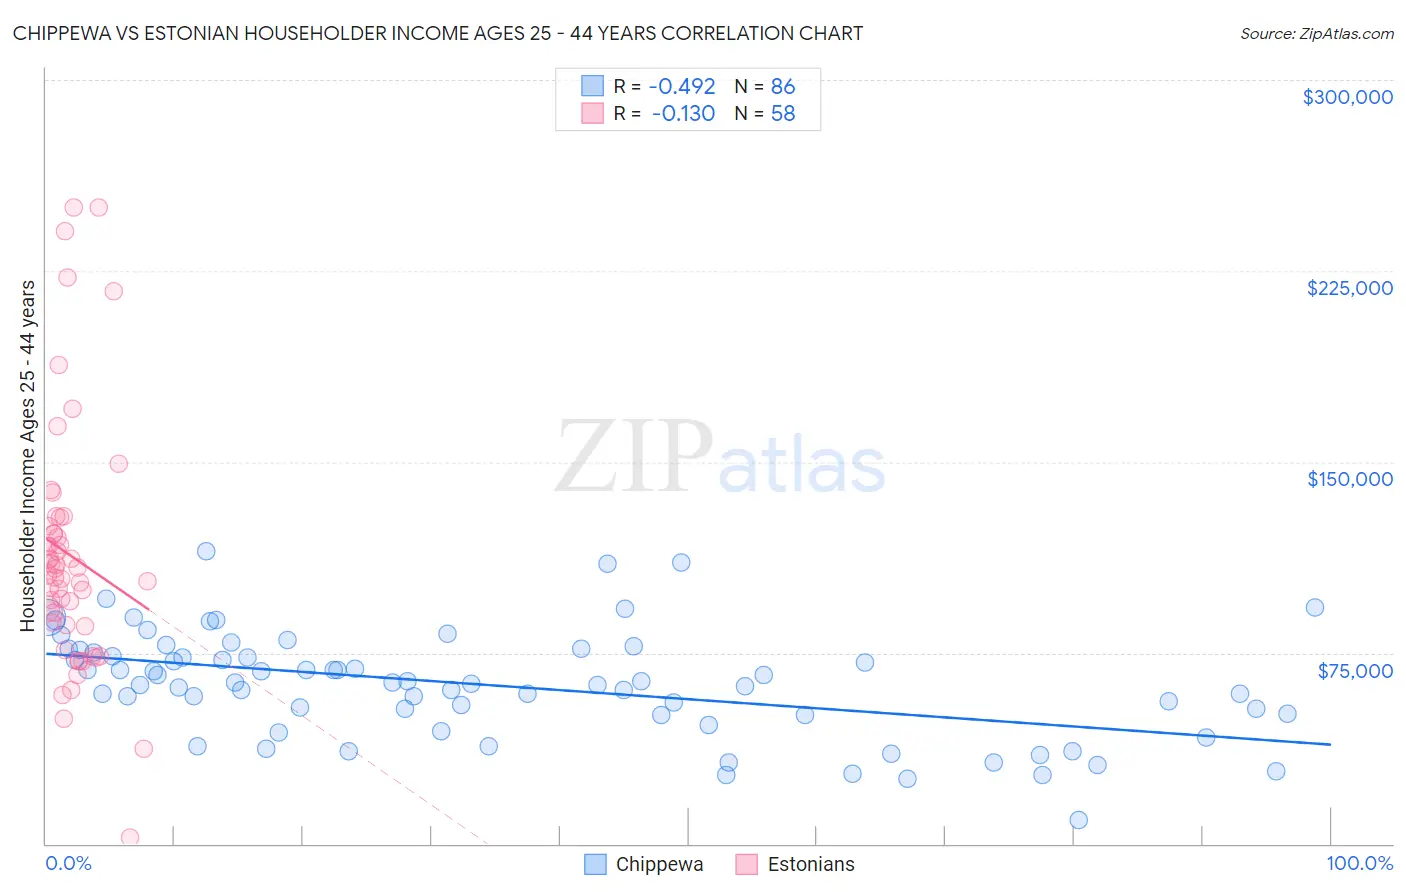 Chippewa vs Estonian Householder Income Ages 25 - 44 years